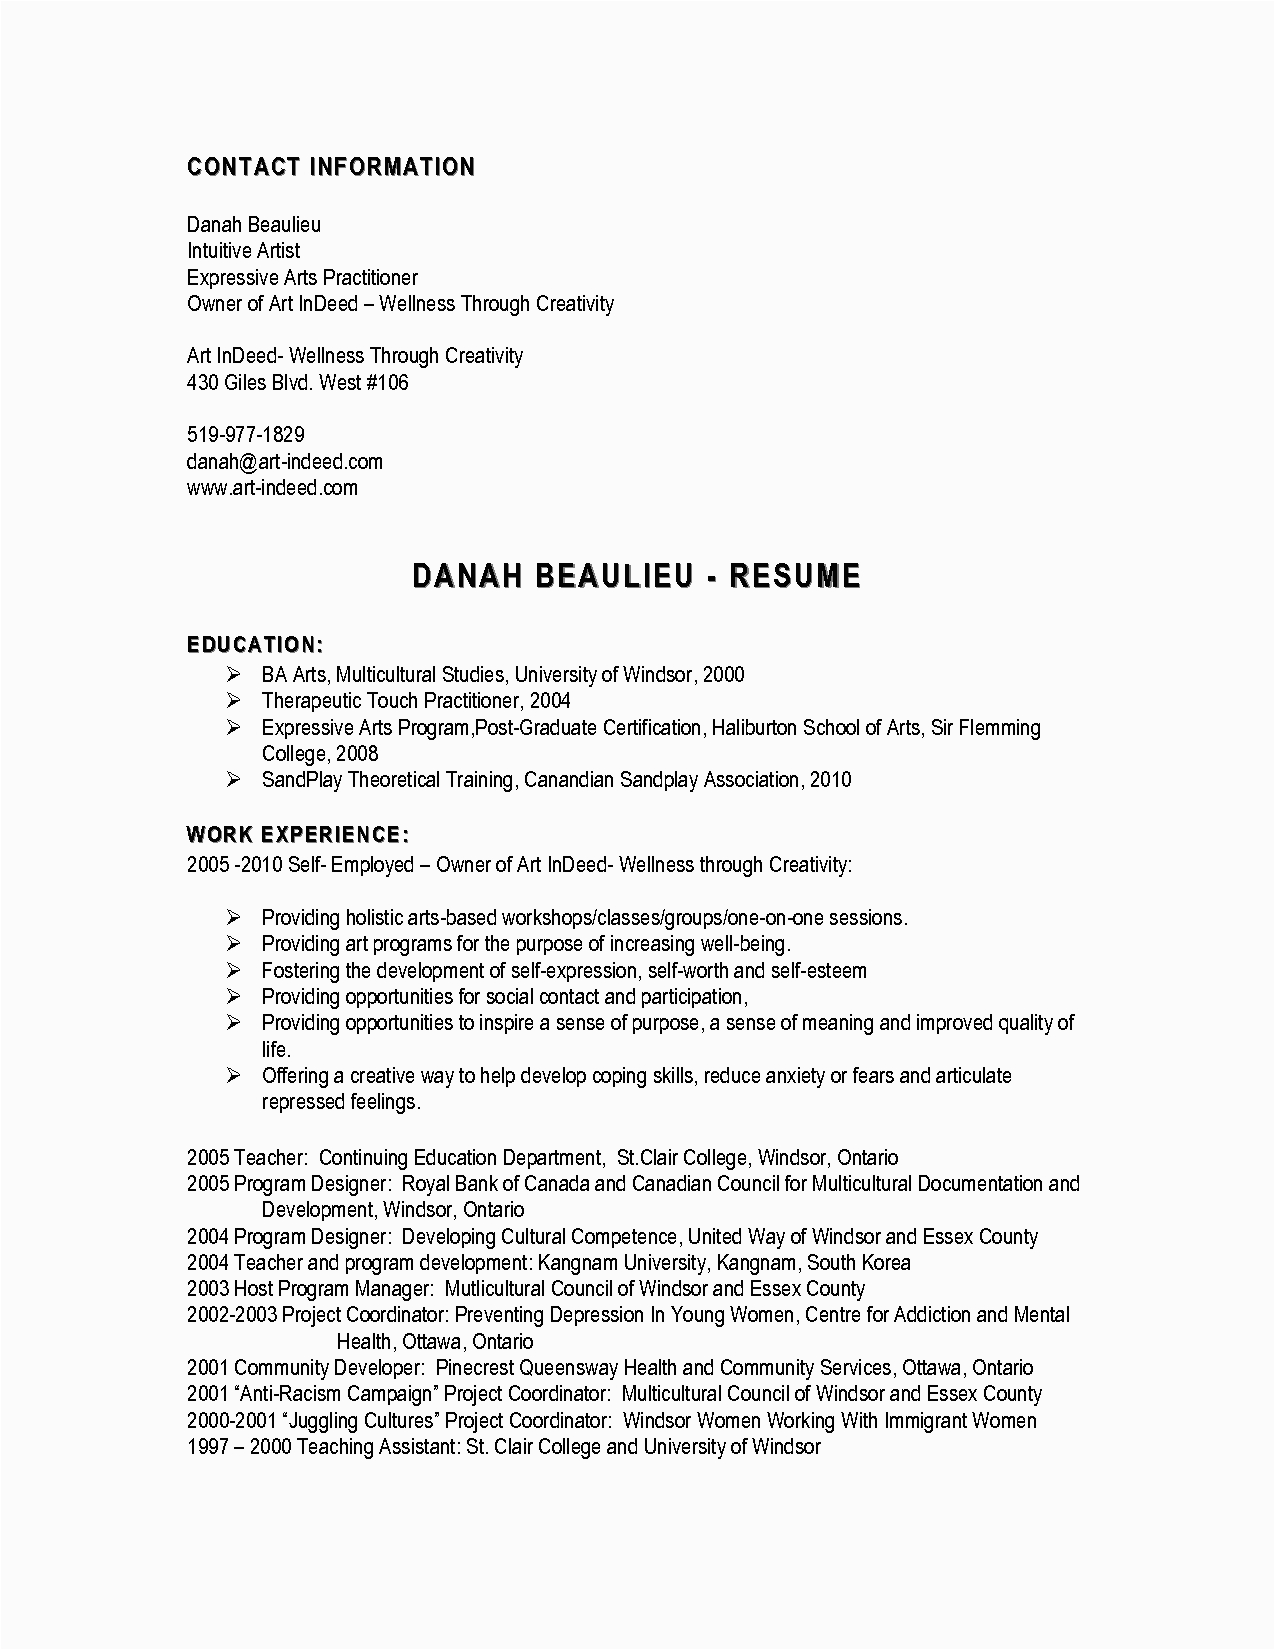 Samples Of A Functional Resume Indeed Sample Resume Template Indeed Resmud